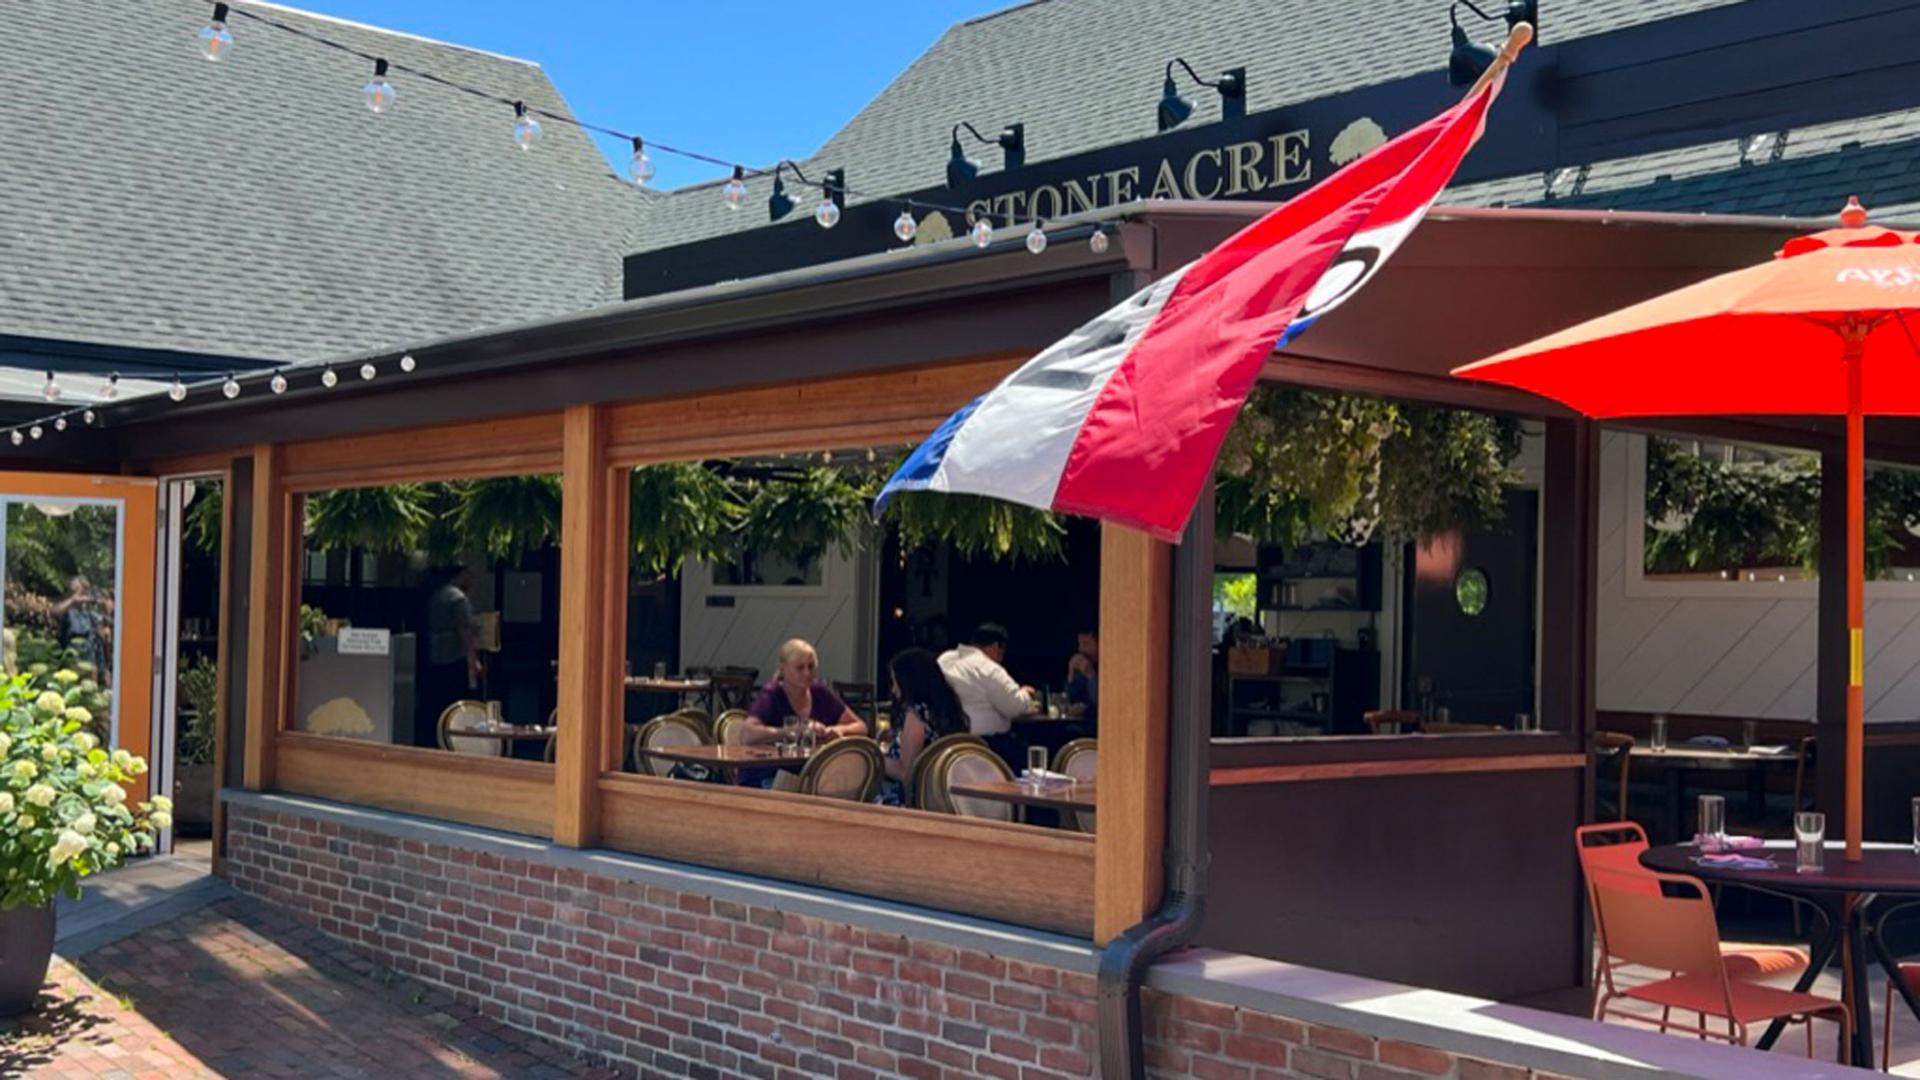 About one-third of the staff at the Stoneacre restaurants in Newport, Rhode Island, is from overseas.